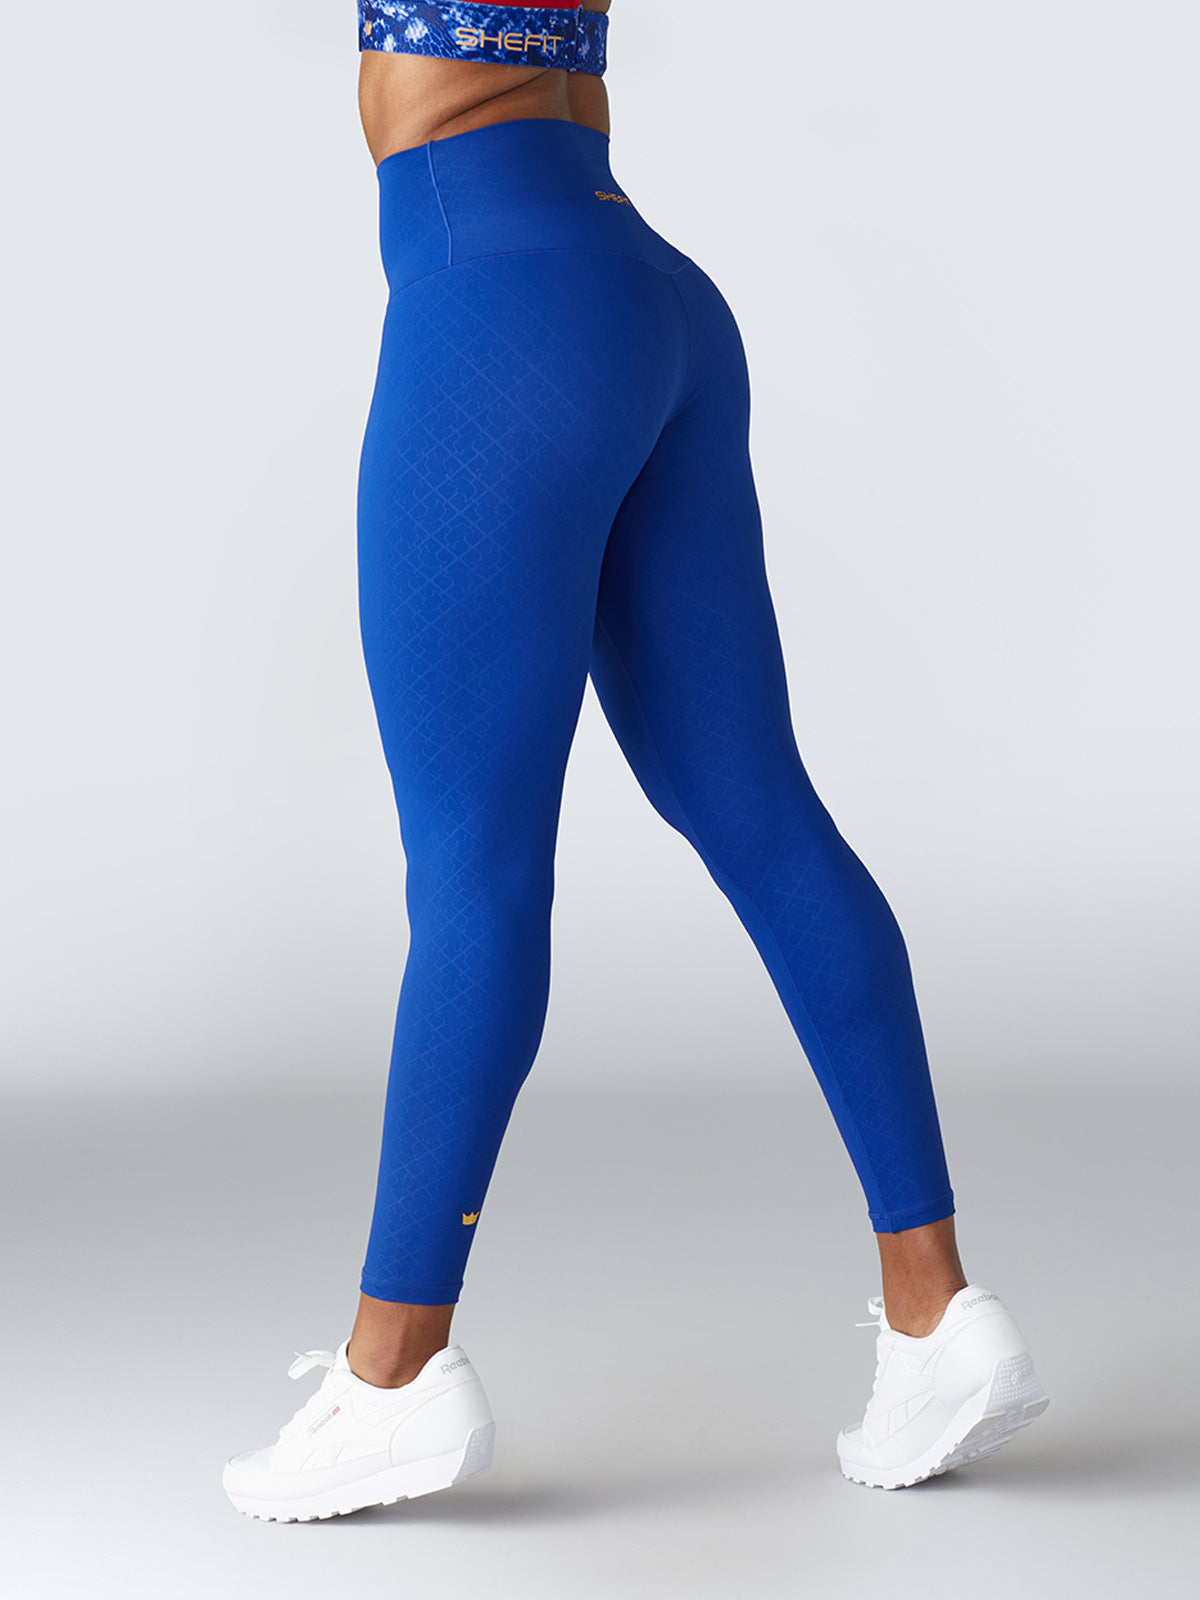 Letsfit High-Waisted Leggings Review - PureWow